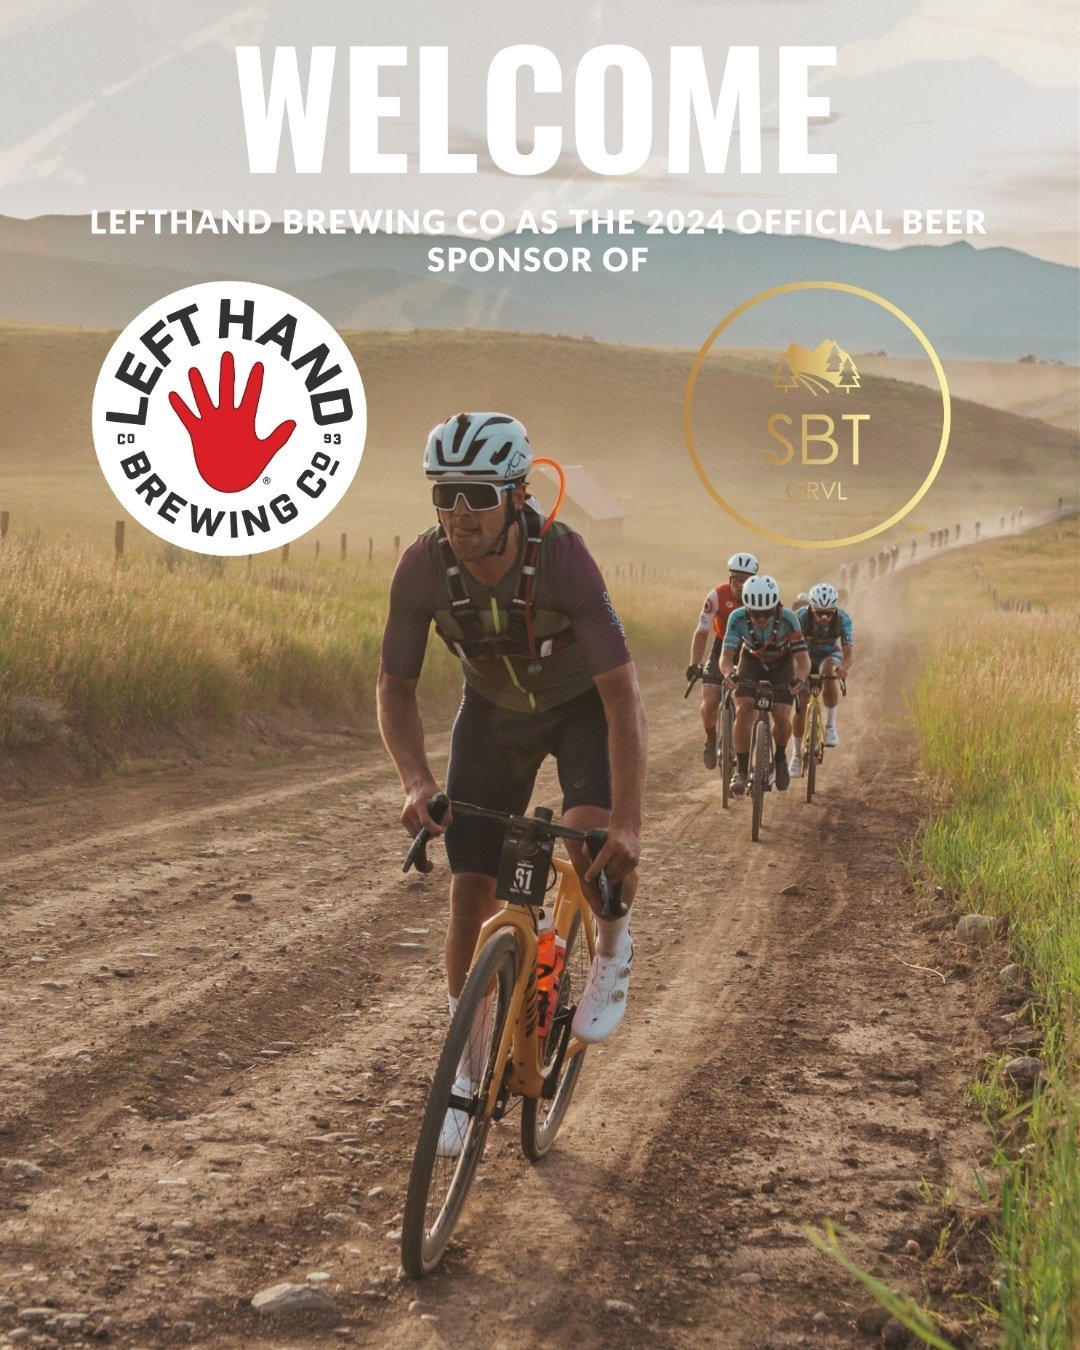 We owe a great big WELCOME and THANK YOU to our 2024 Official Beer Sponsor, @lefthandbrewing! For those of you who love a cold post ride 🍺 you&rsquo;re in for a huge treat this year. Be sure to come snag yourself one of their tasty beers post ride, 